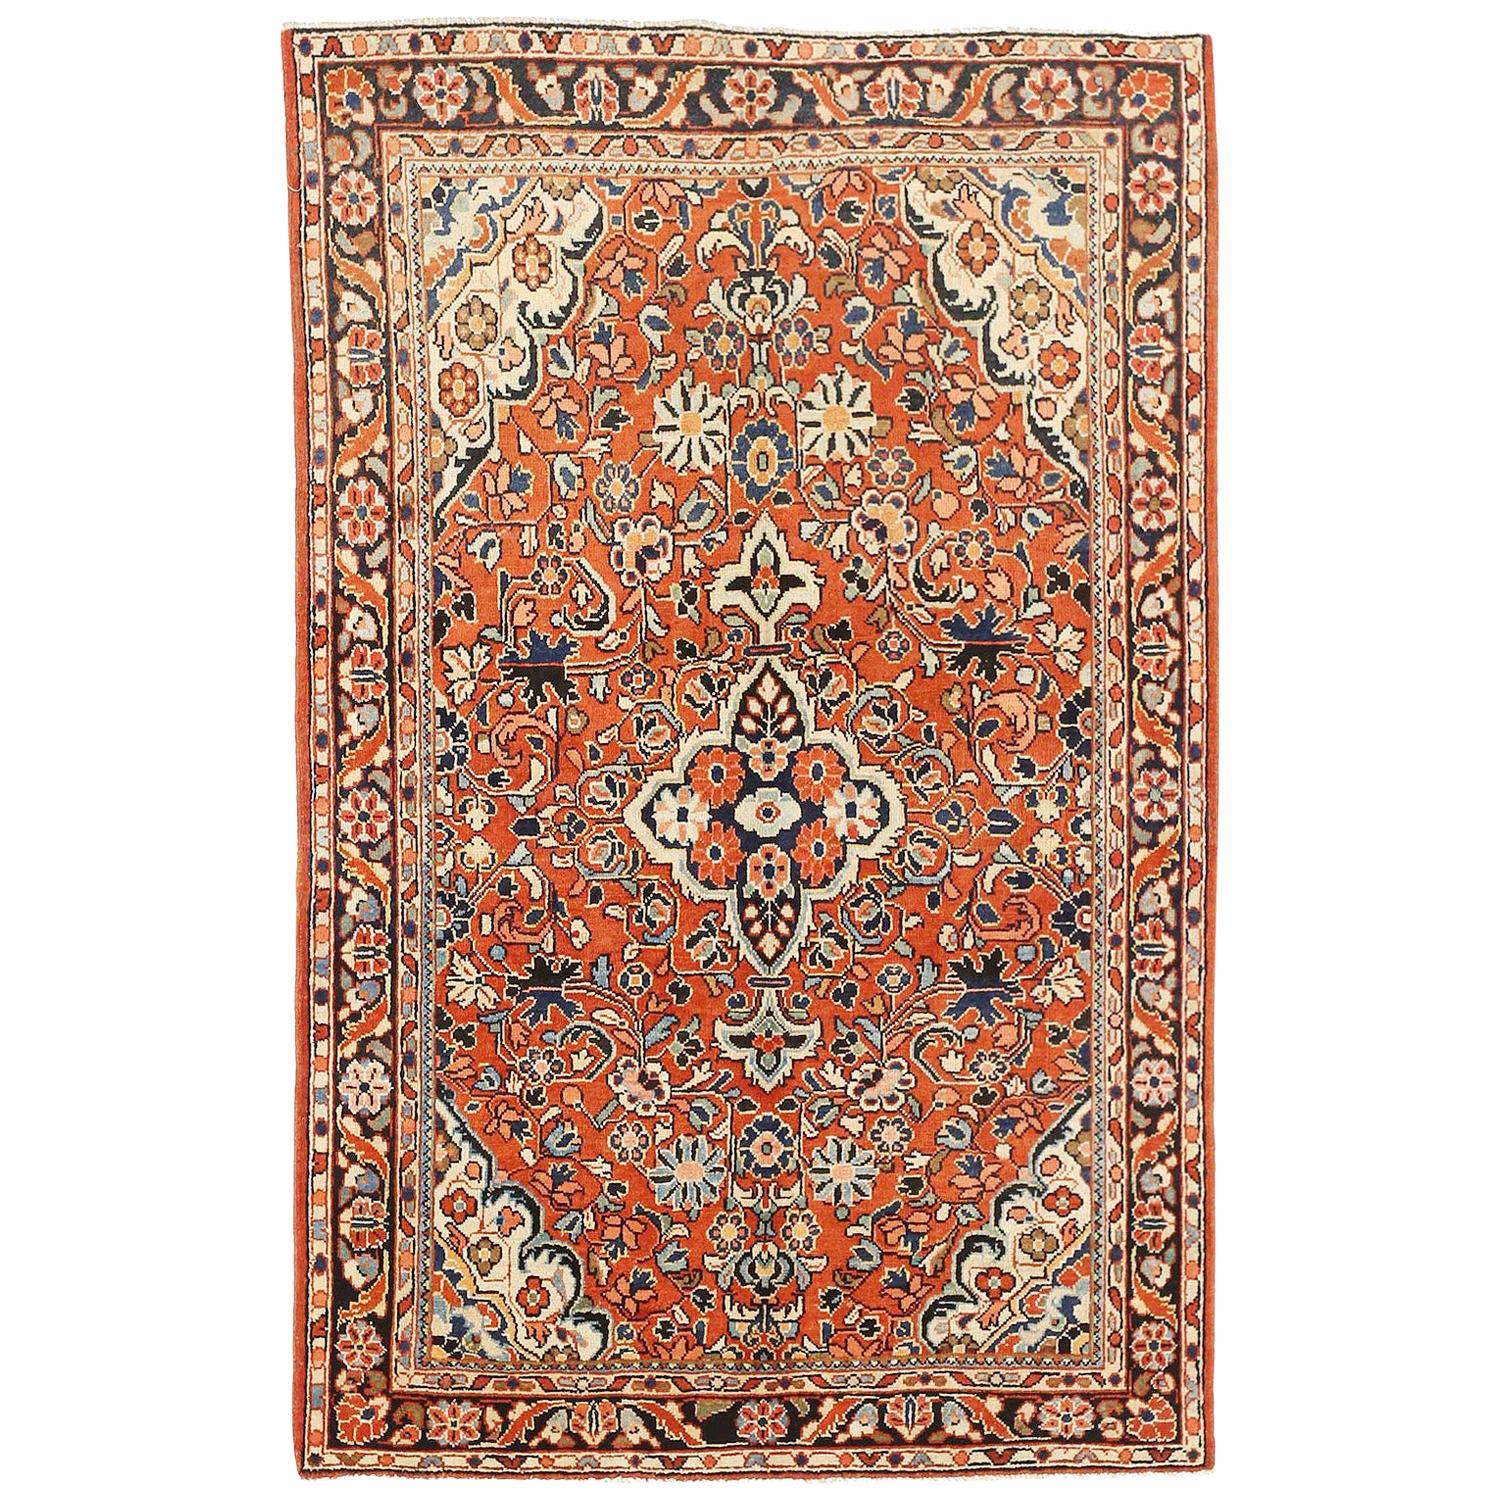 Antique Persian Mahal Rug with Blue and White Floral Details on Rust Field For Sale